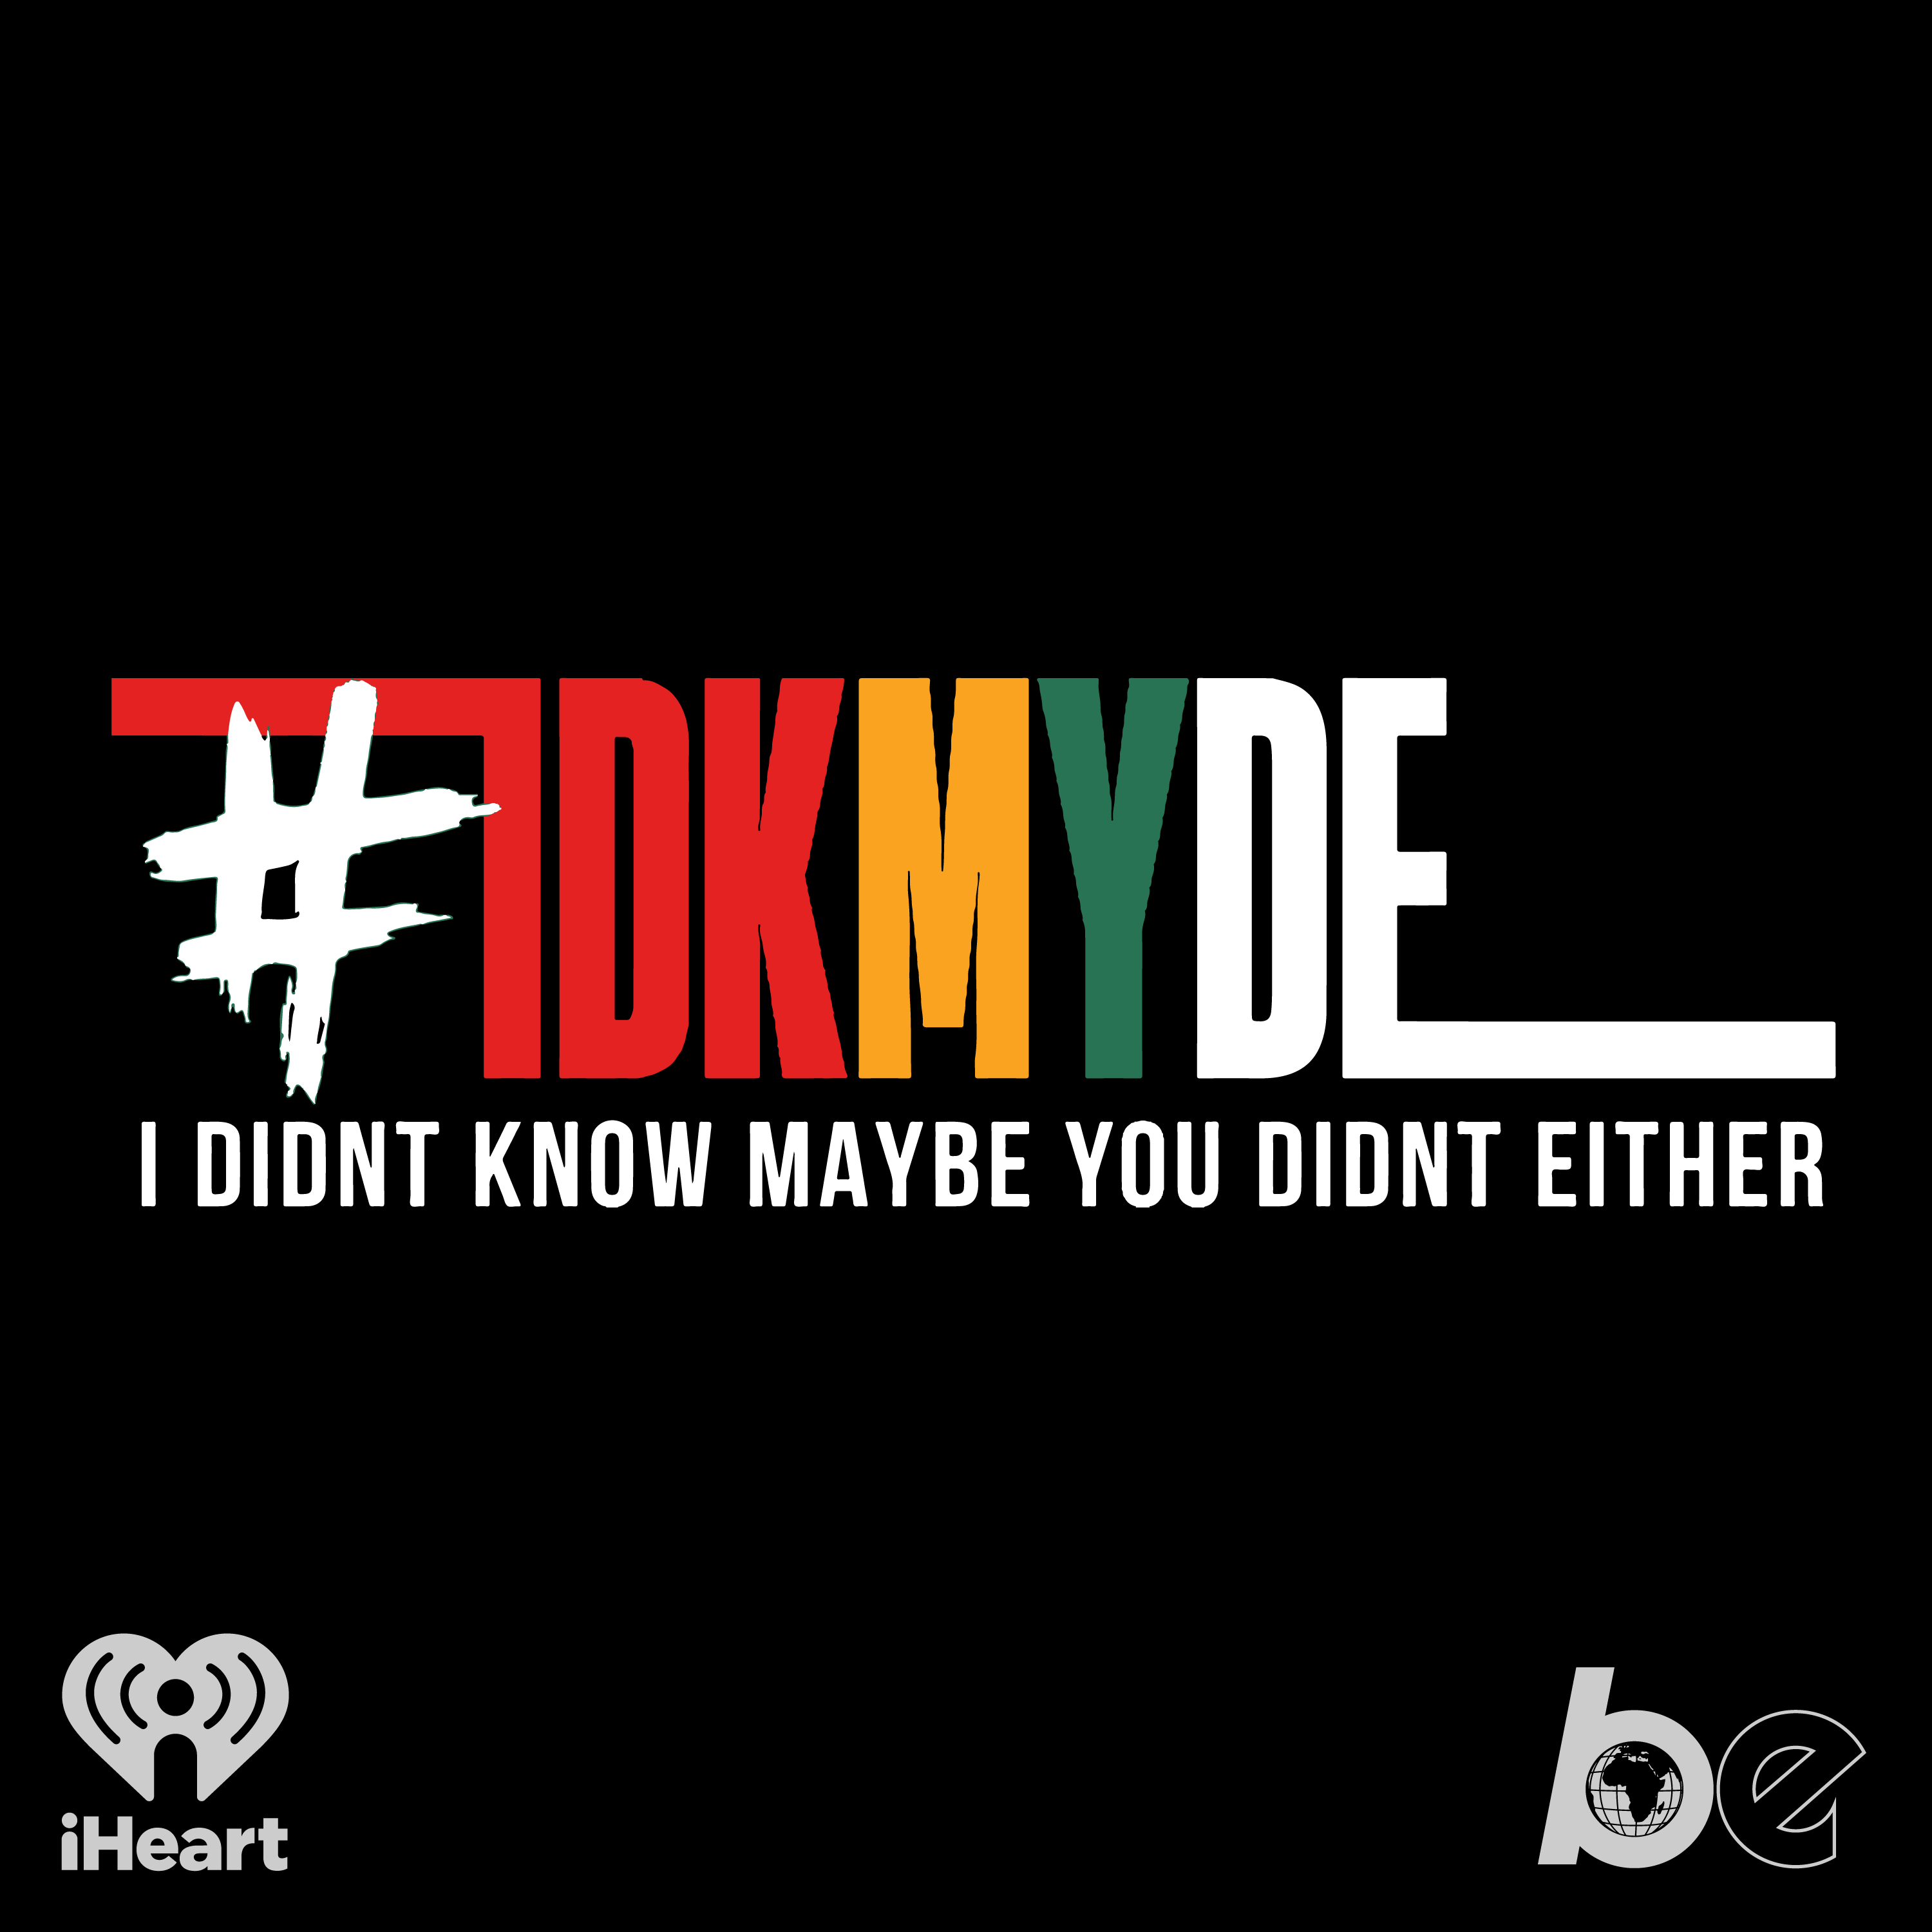 IDKMYDE: The 1st Black Owned Business